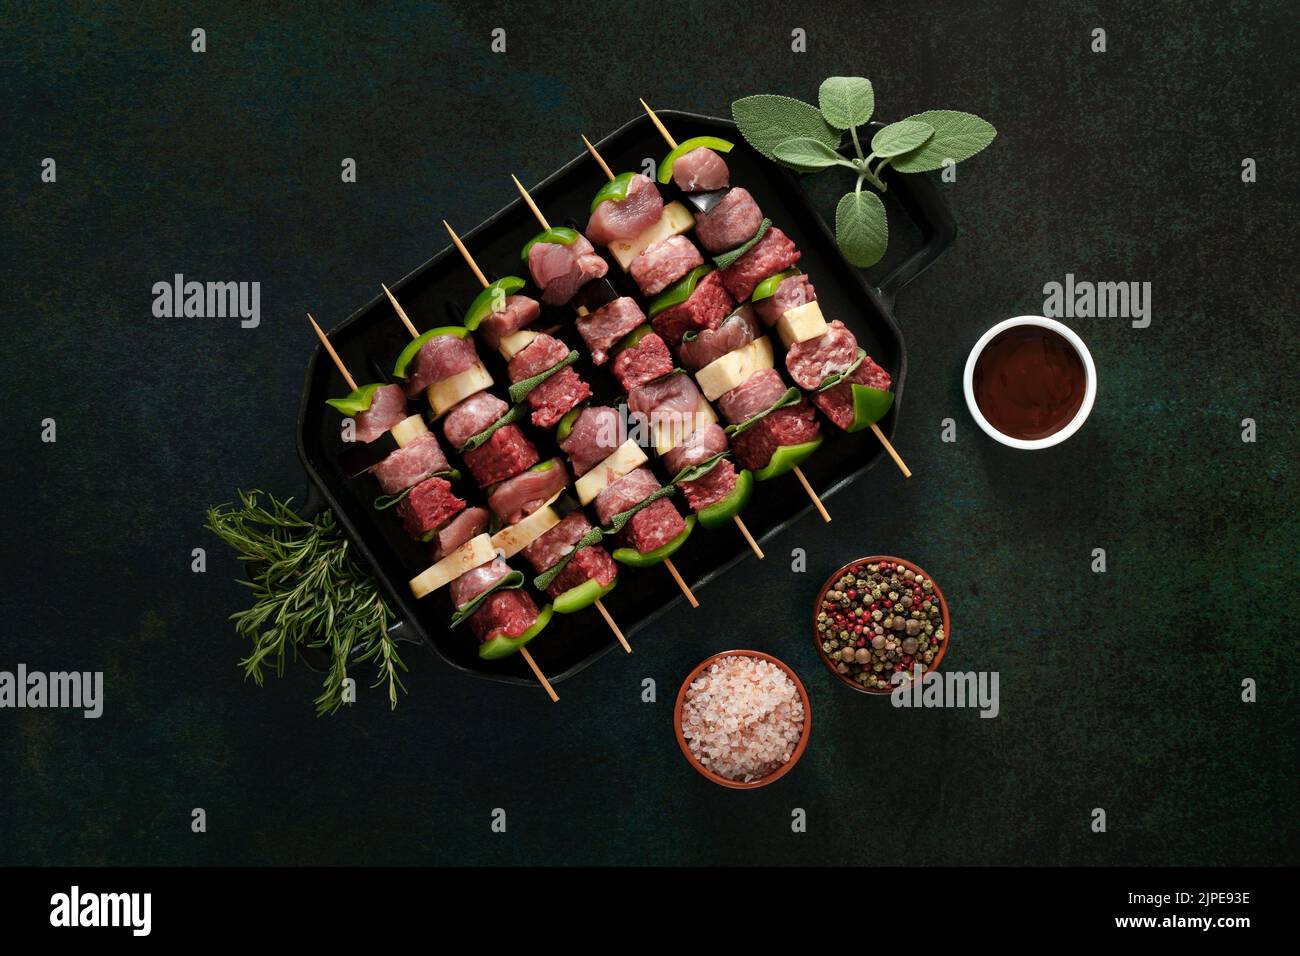 Raw meat skewers before cooking on a dark background. Stock Photo